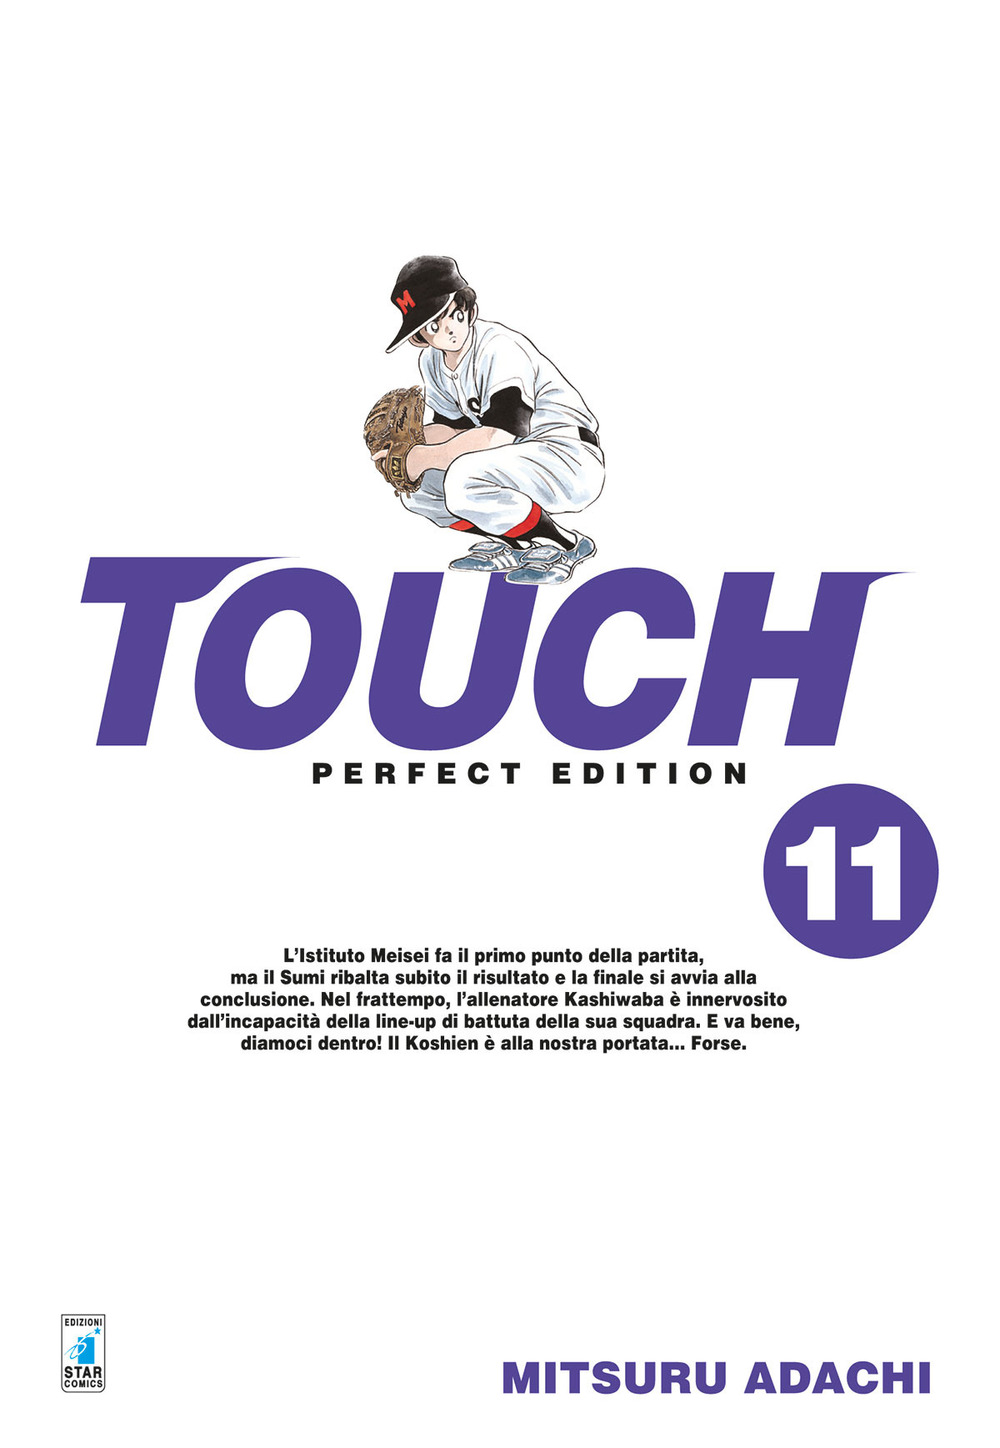 Touch. Perfect edition. Vol. 11